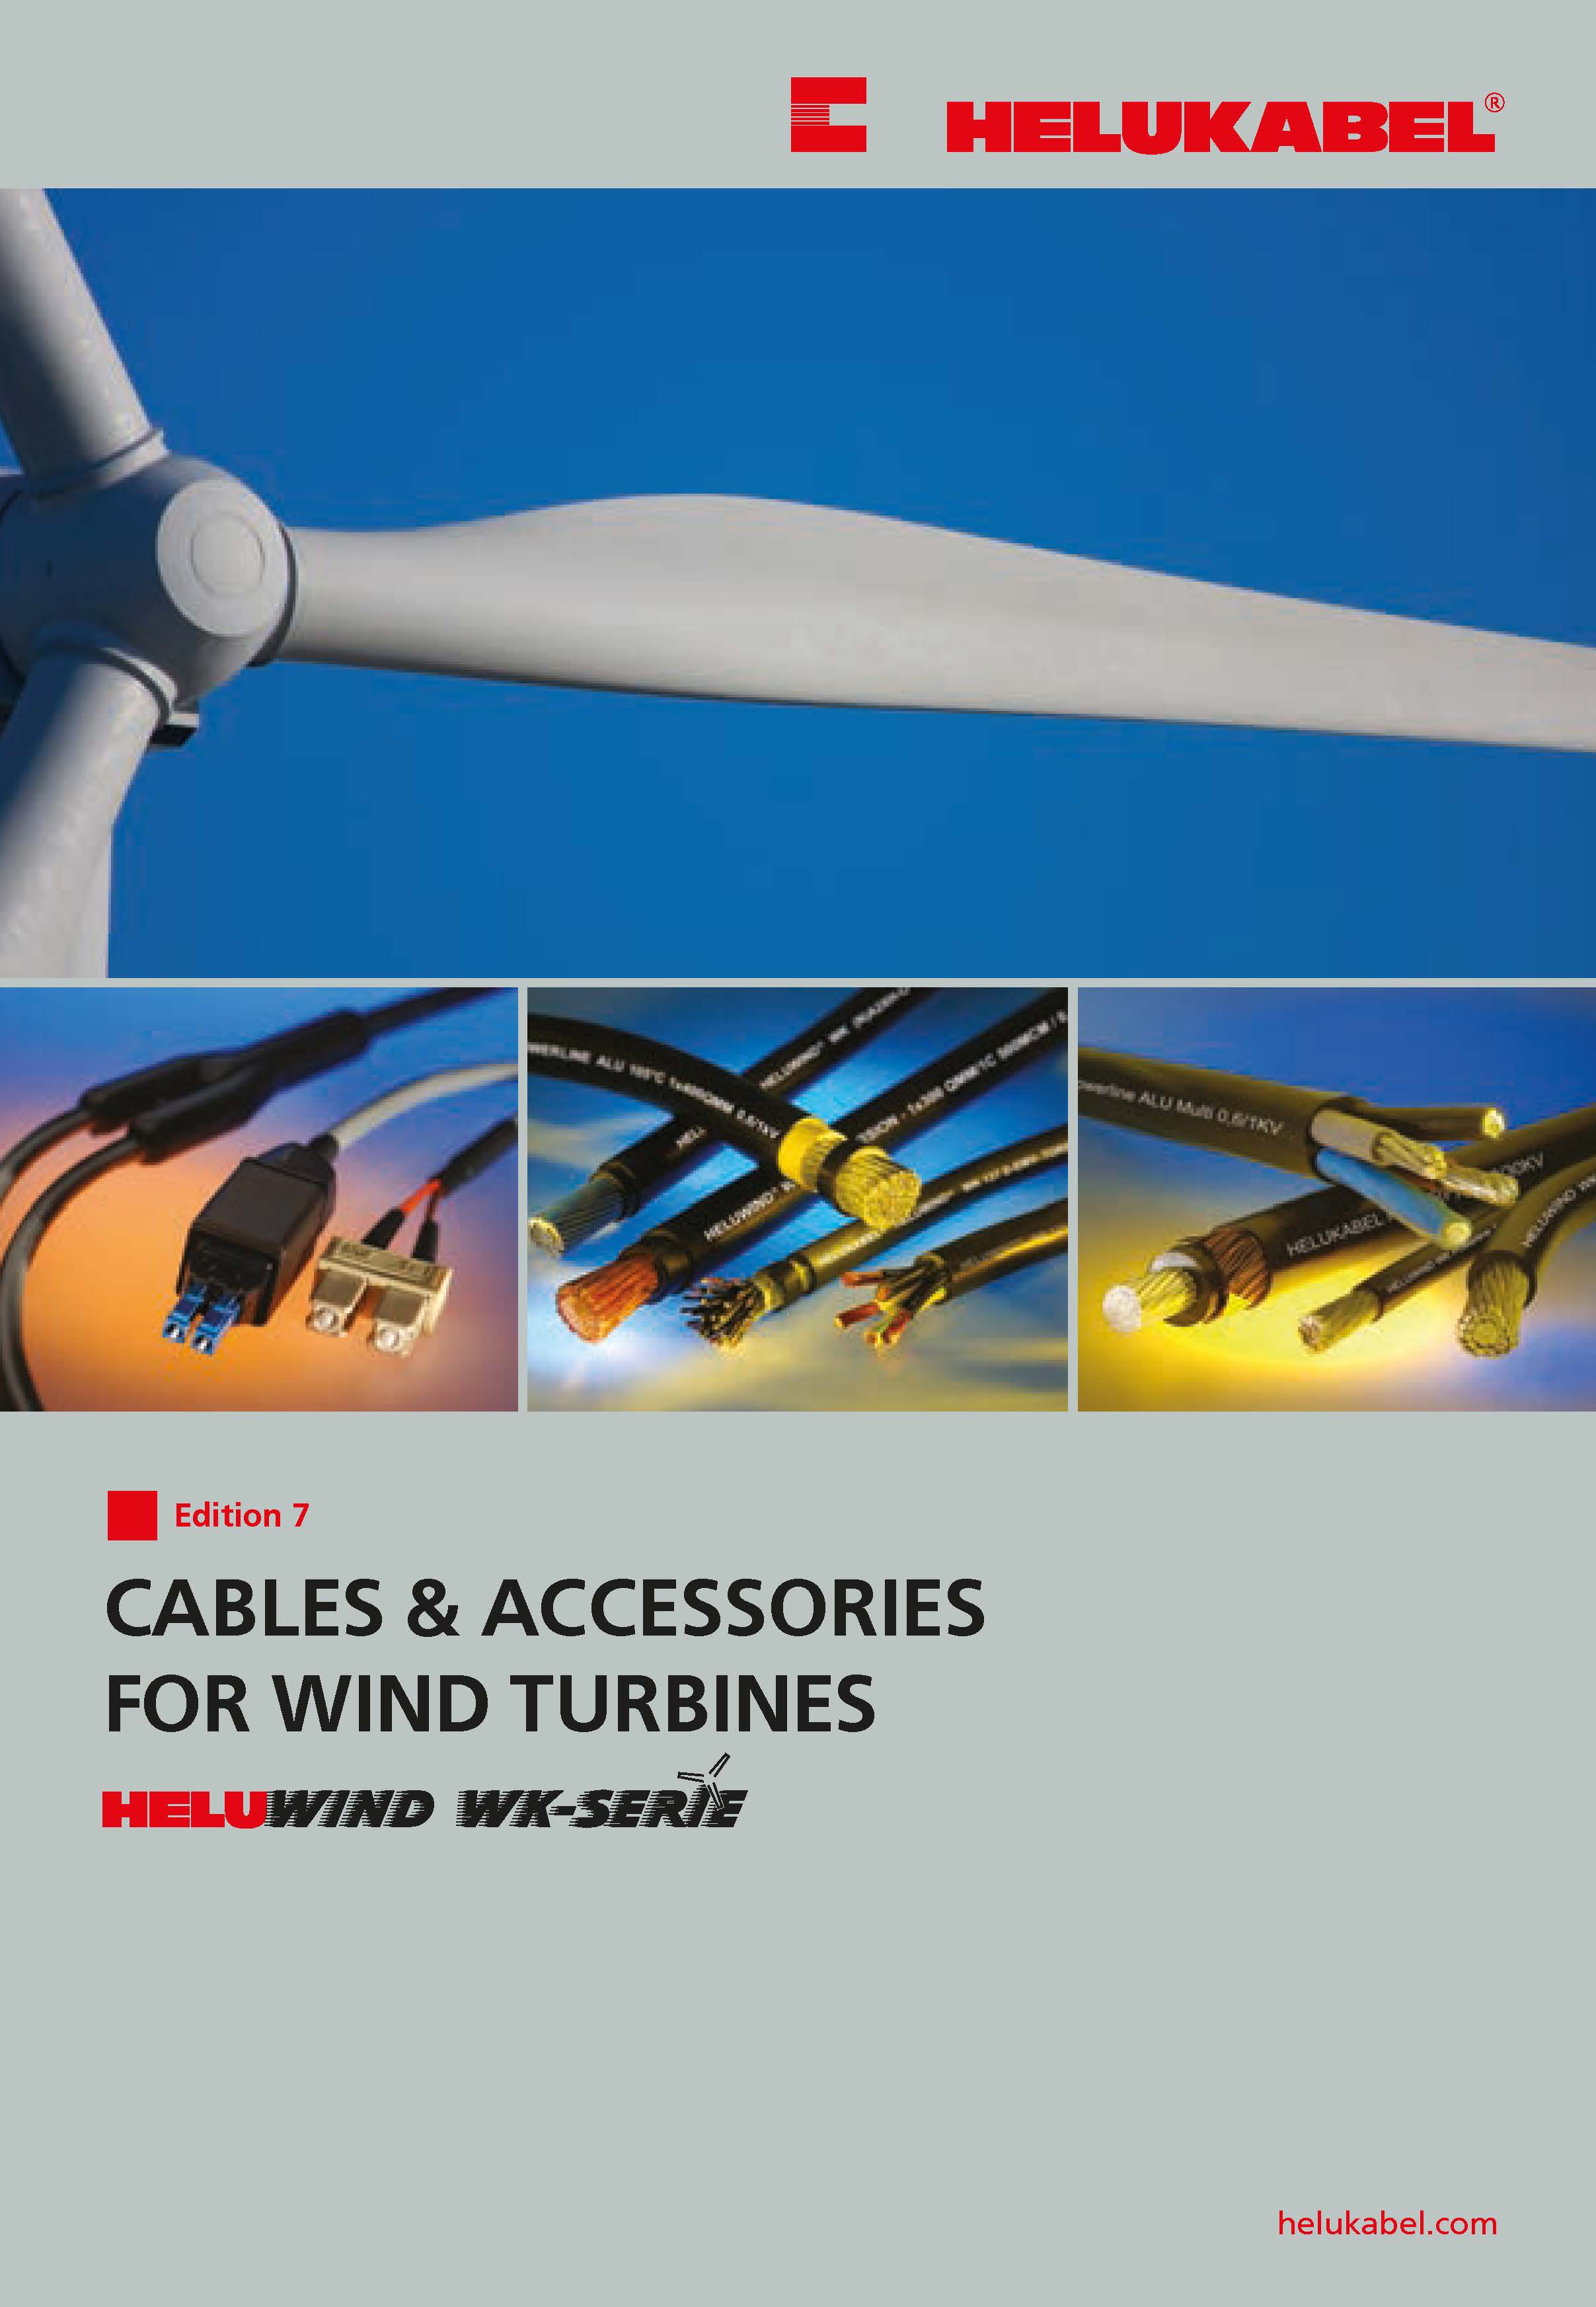 Cables & Accessories for Wind Turbines Ed. 7